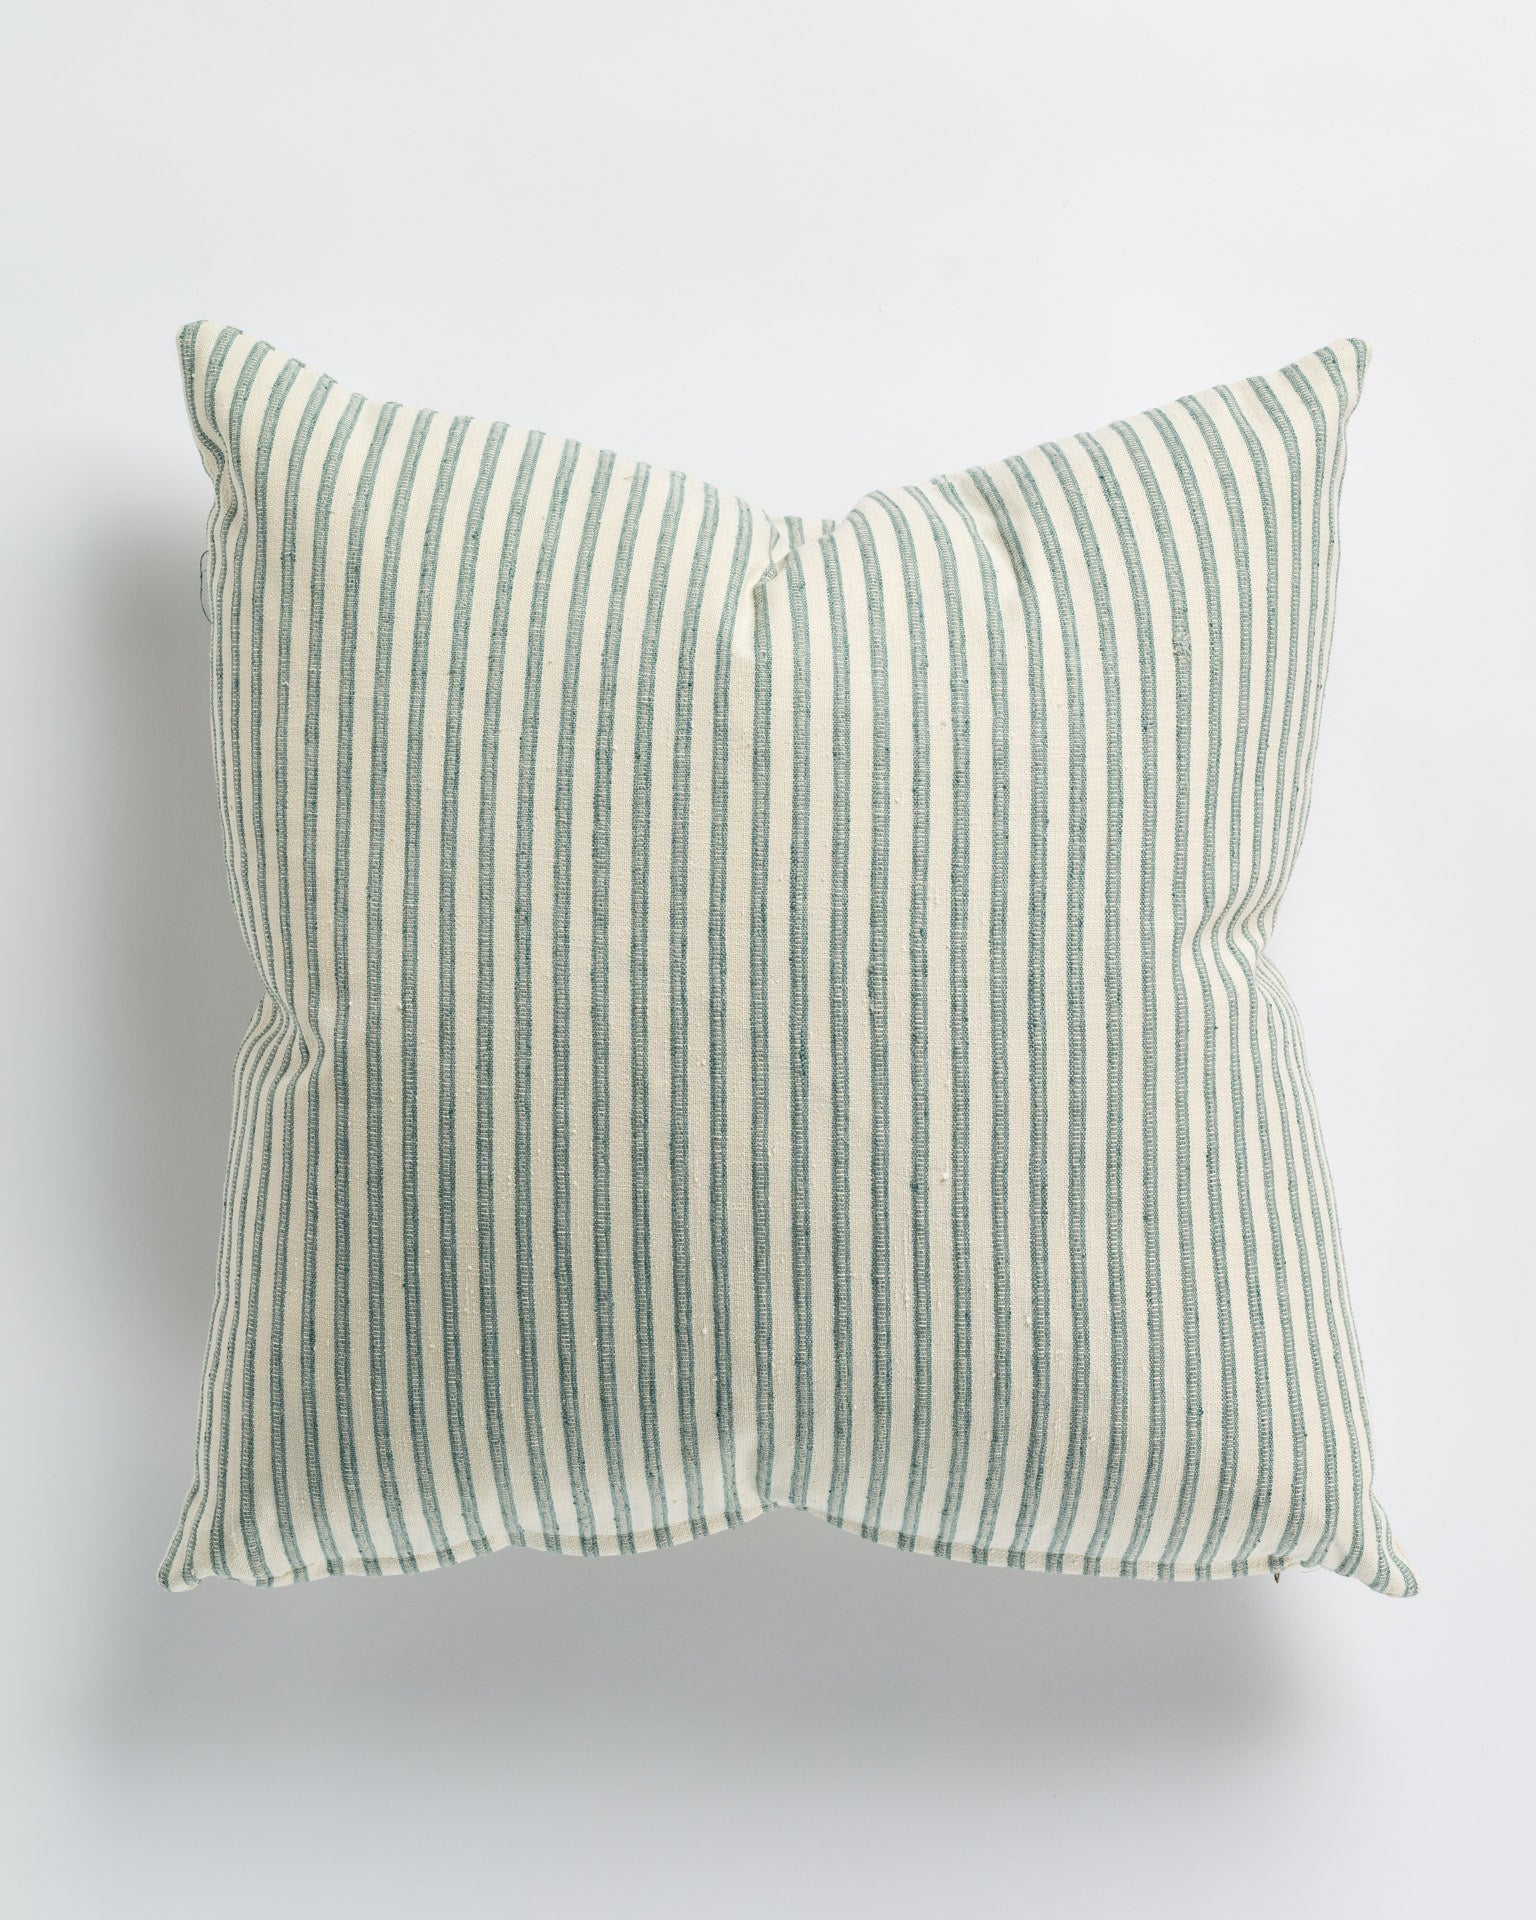 A Bones Blue Spruce Pillow 26x26 by Gabby with pale beige and soft green vertical stripes on a neutral background, photographed frontally against a plain white surface in a Scottsdale Arizona bungalow.